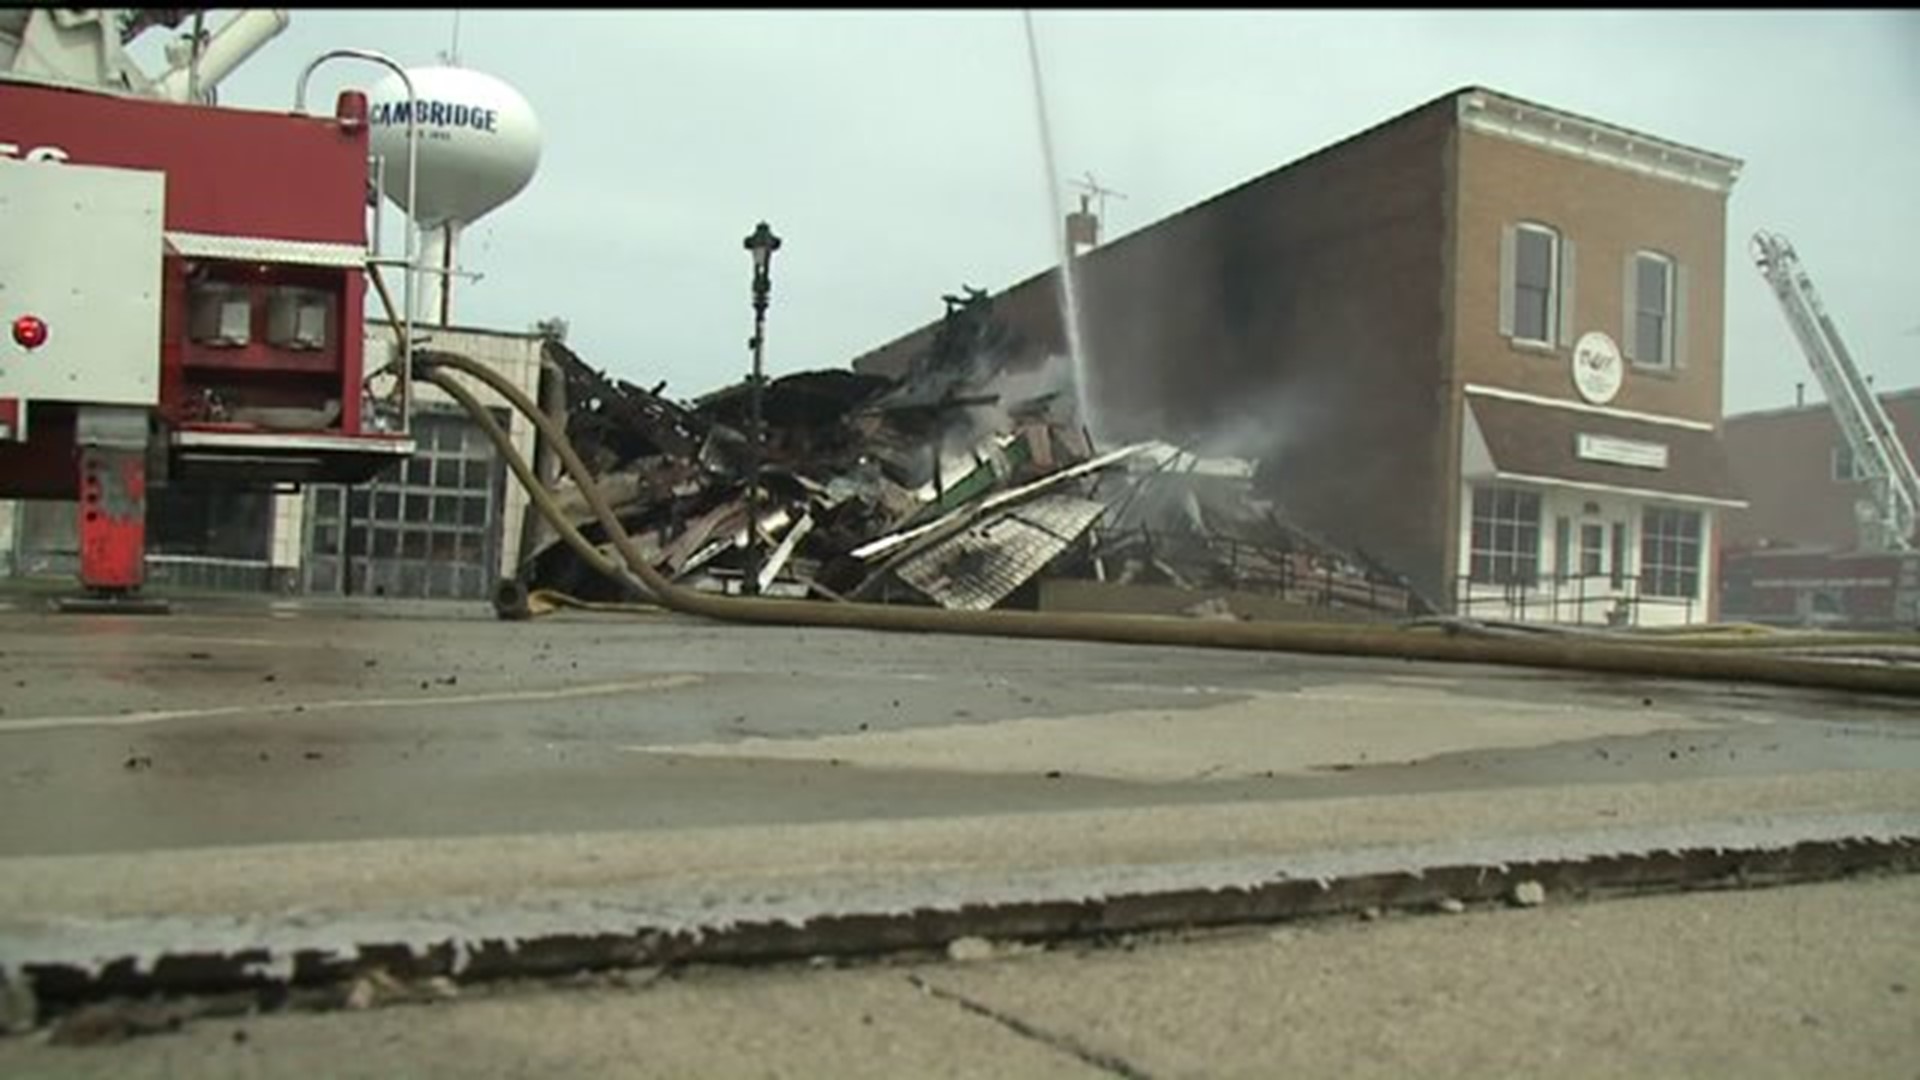 Man rescued from burning building in downtown Cambridge, Illinois